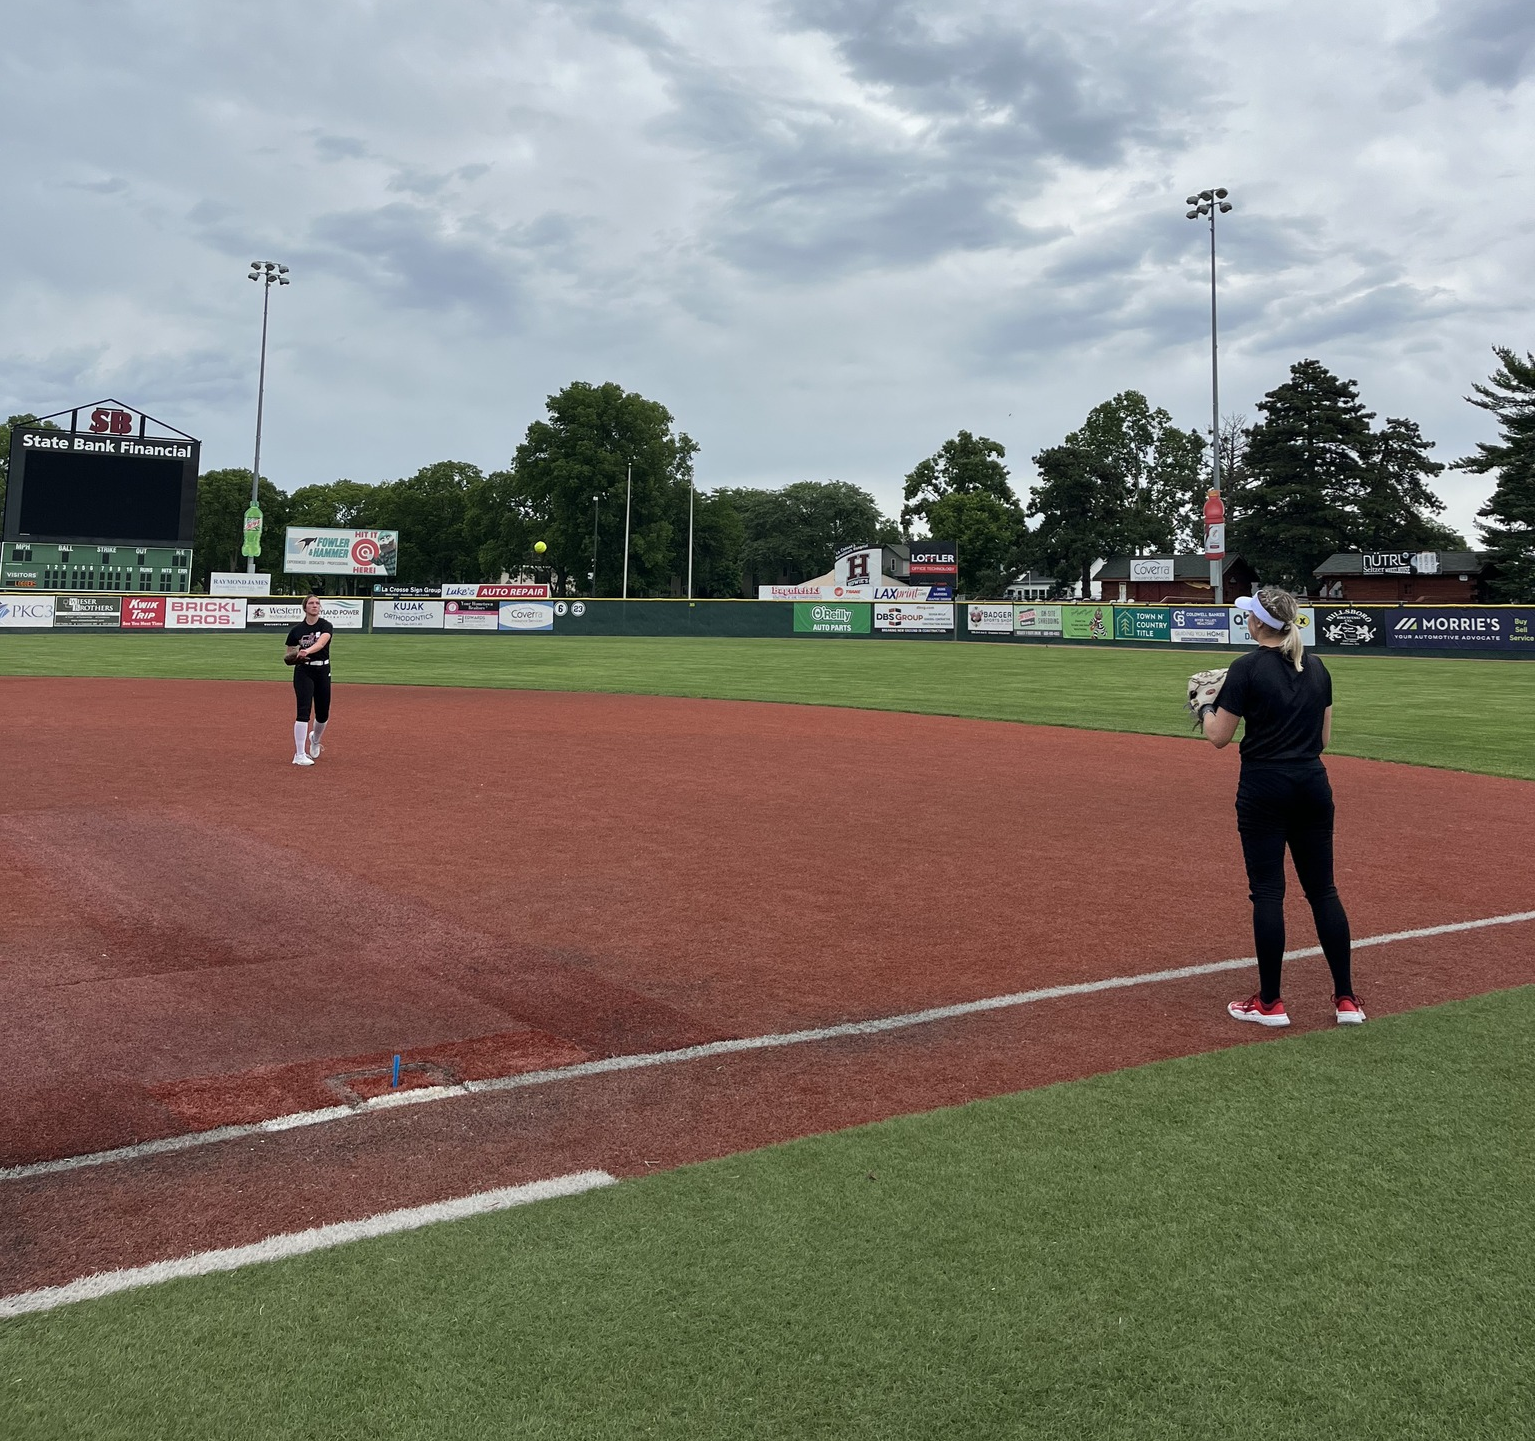 La Crosse Steam softball’s first-ever game Saturday at Copeland Park